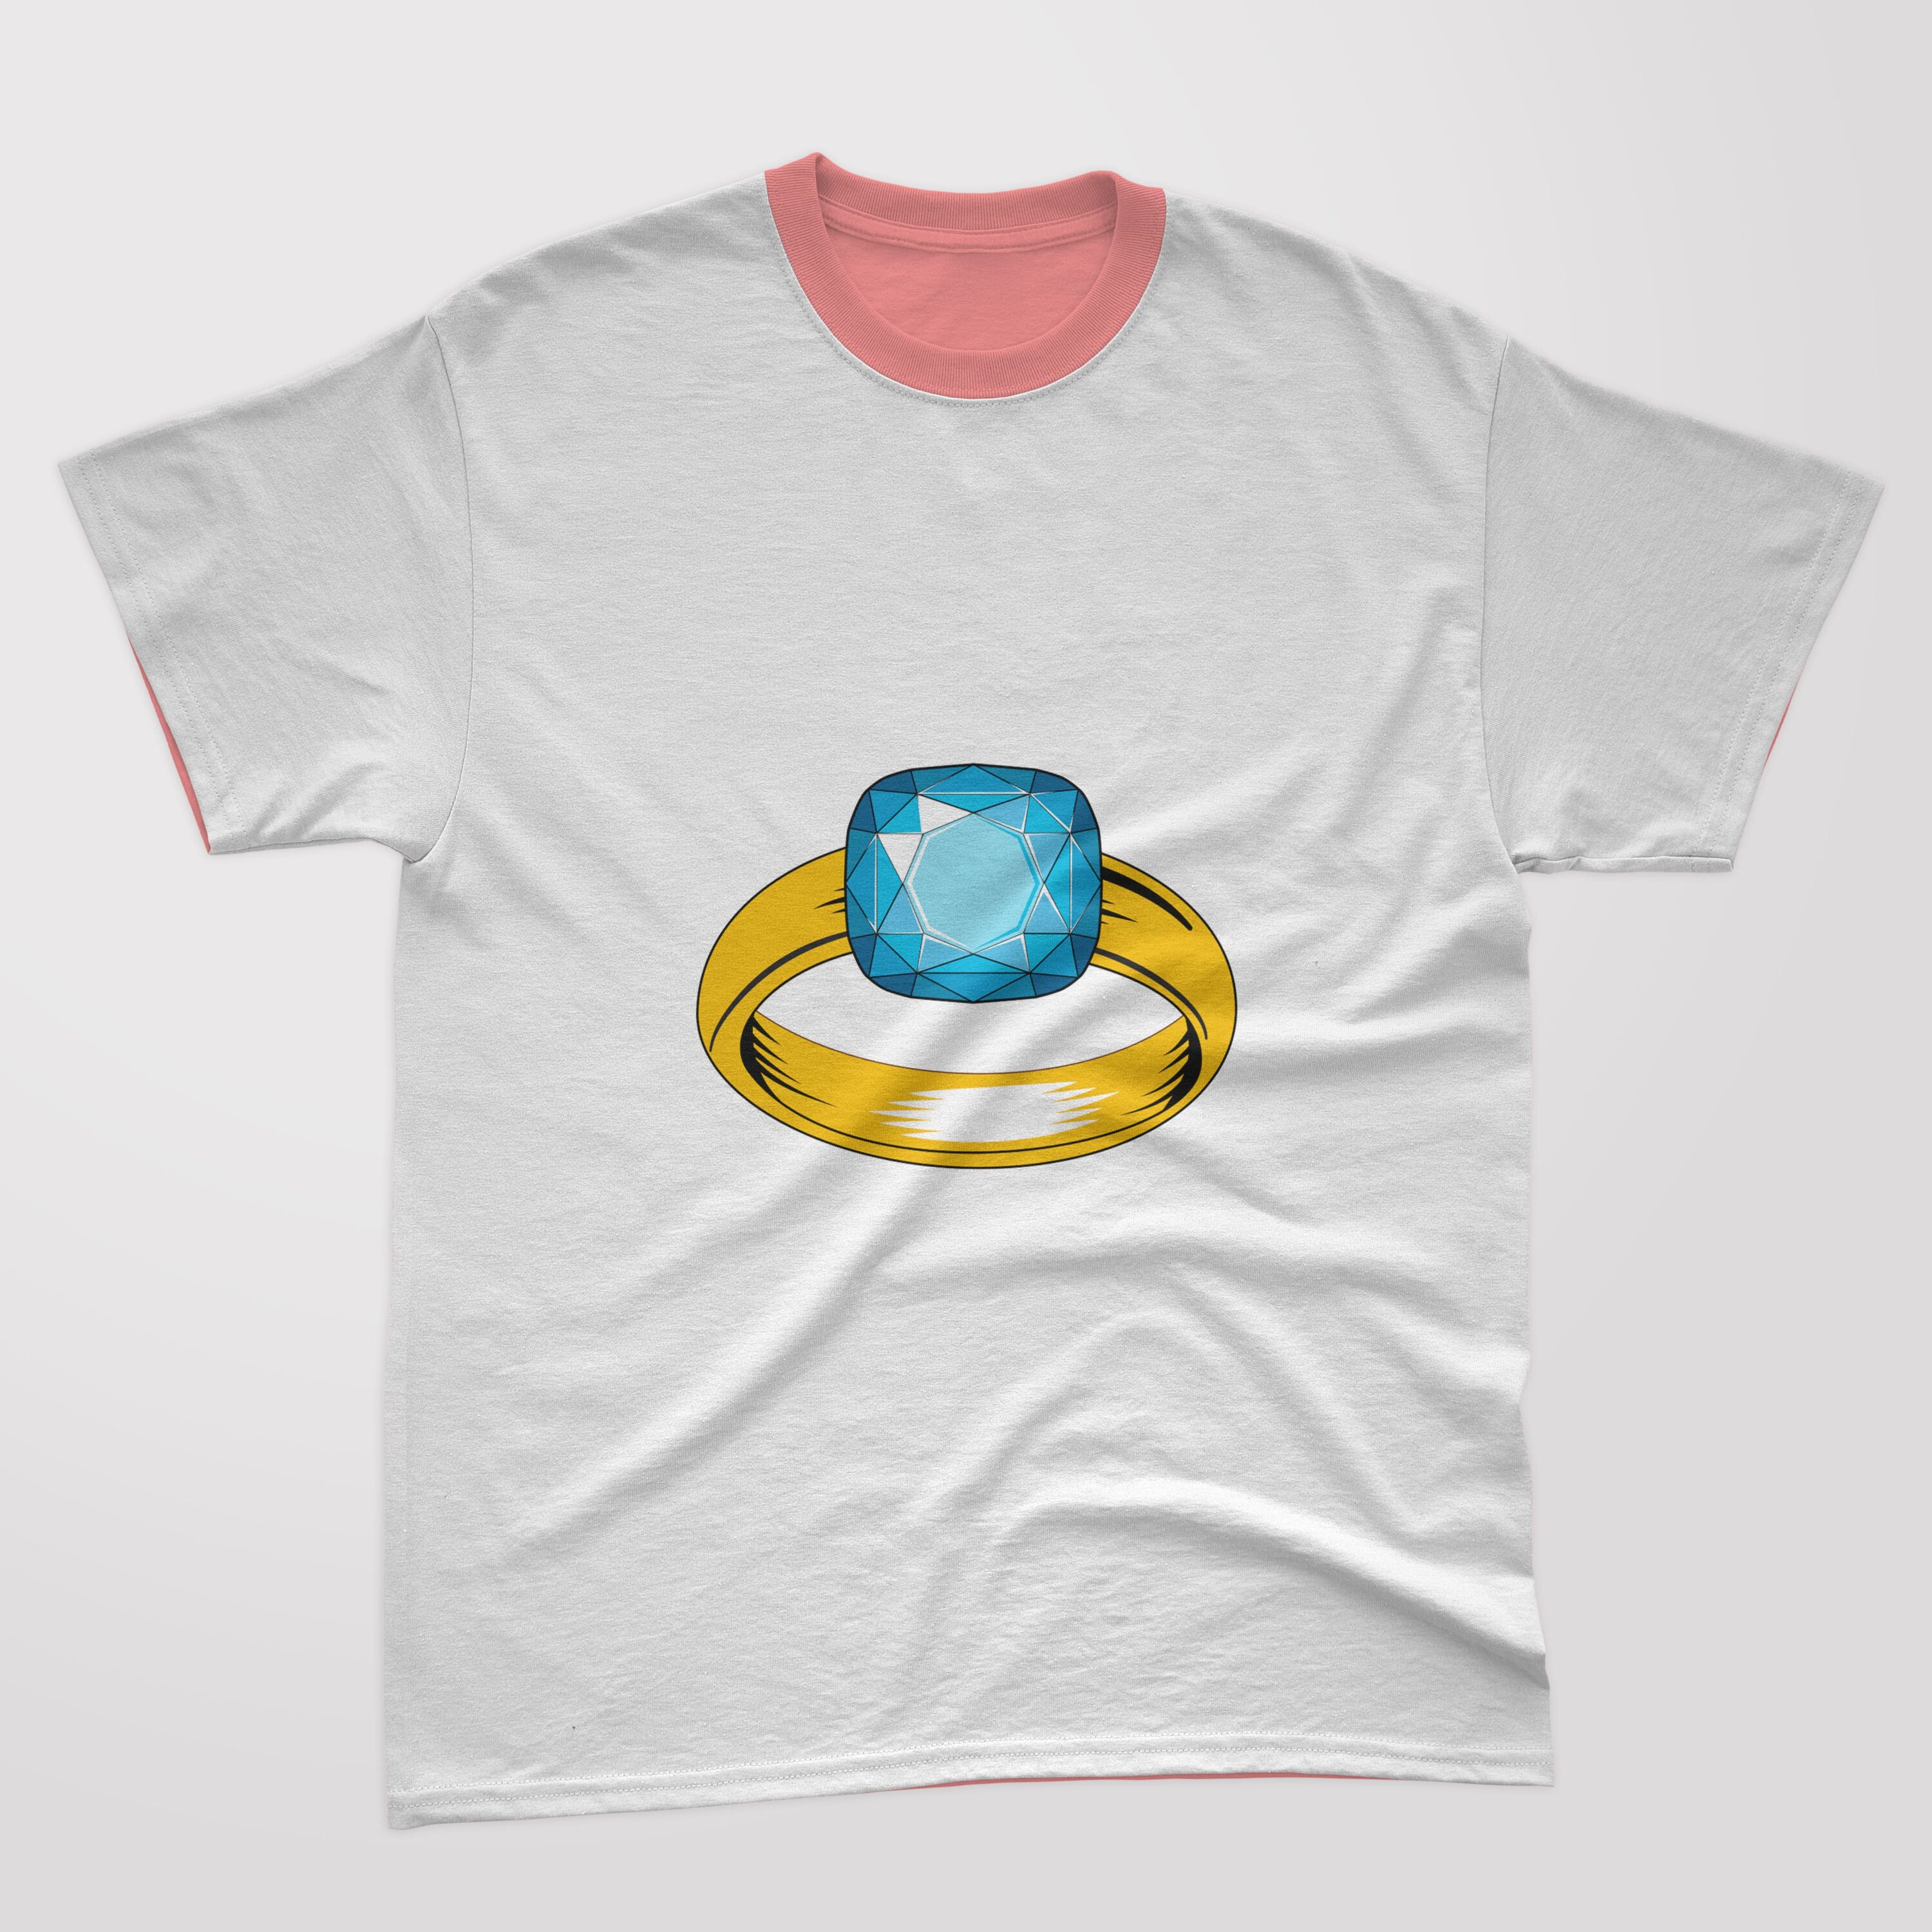 Image of a T-shirt with a colorful diamond ring print.